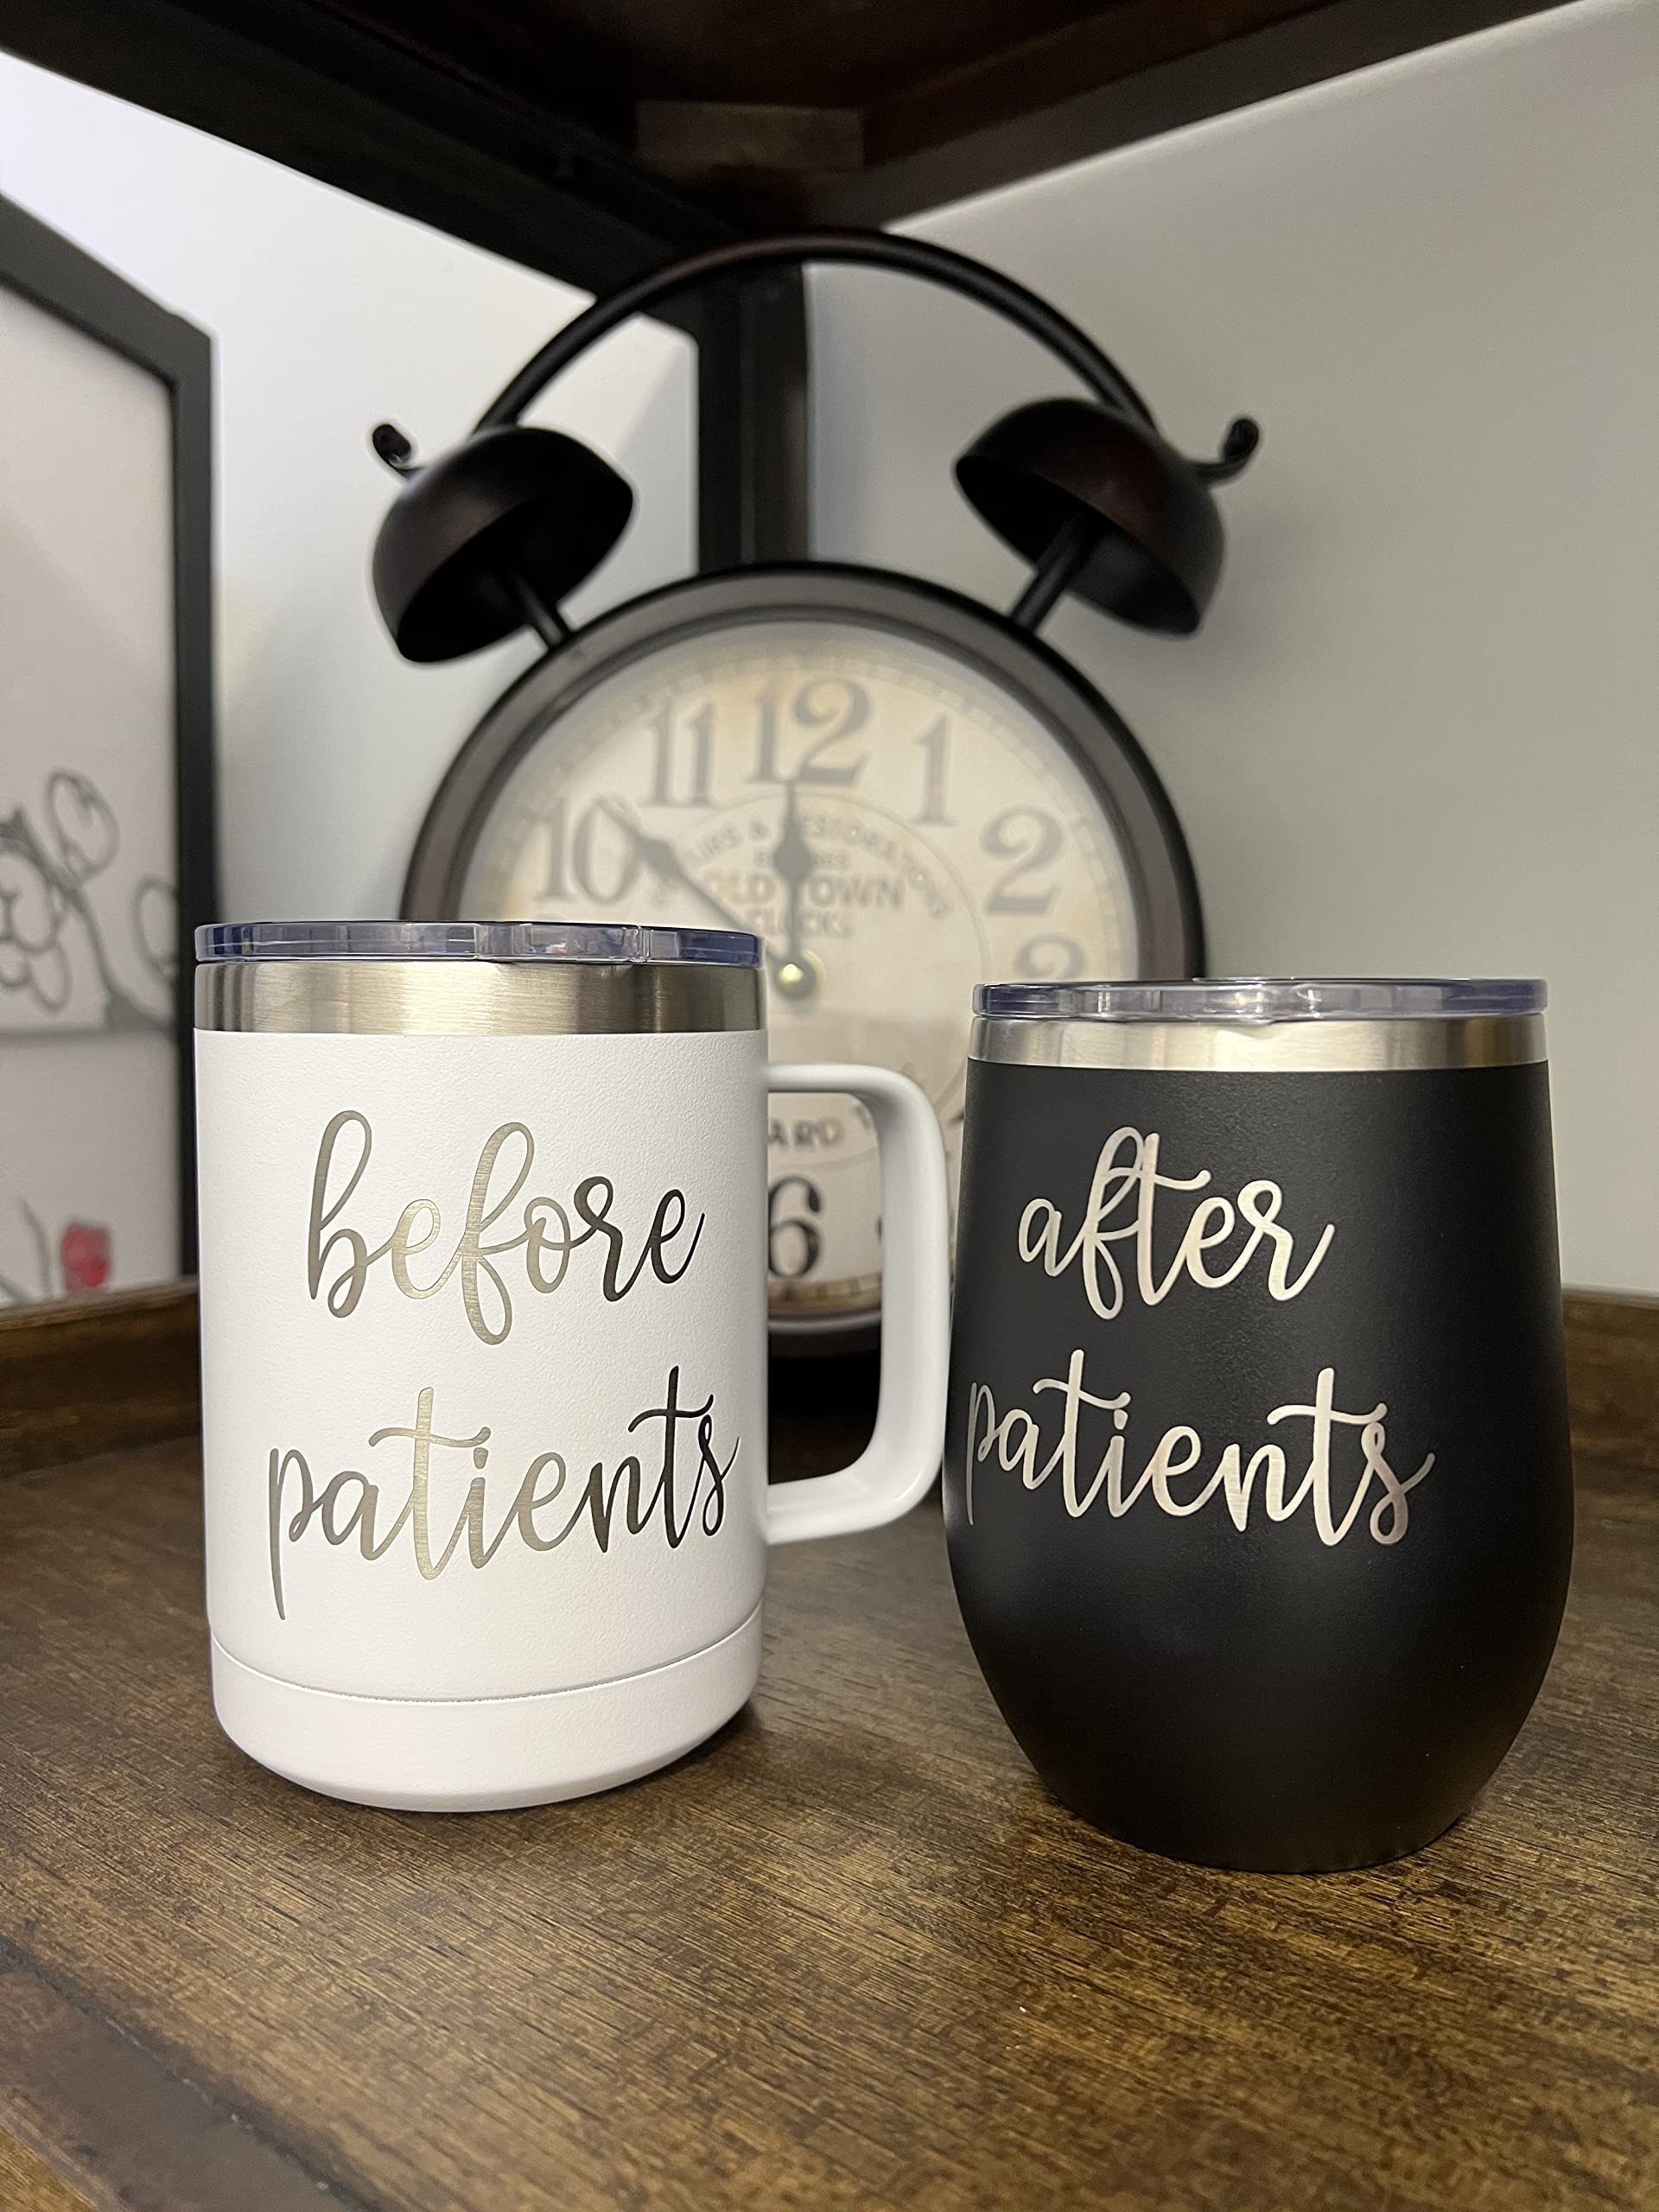 Before Patients, After Patients Engraved Stainless Steel 15 oz Coffee Mug, 12 oz Stemless Wine Glass Set - Unique Gift Idea for Doctor, Physician, Nurse, Hygienist, Medical, Dental - Graduation Gifts